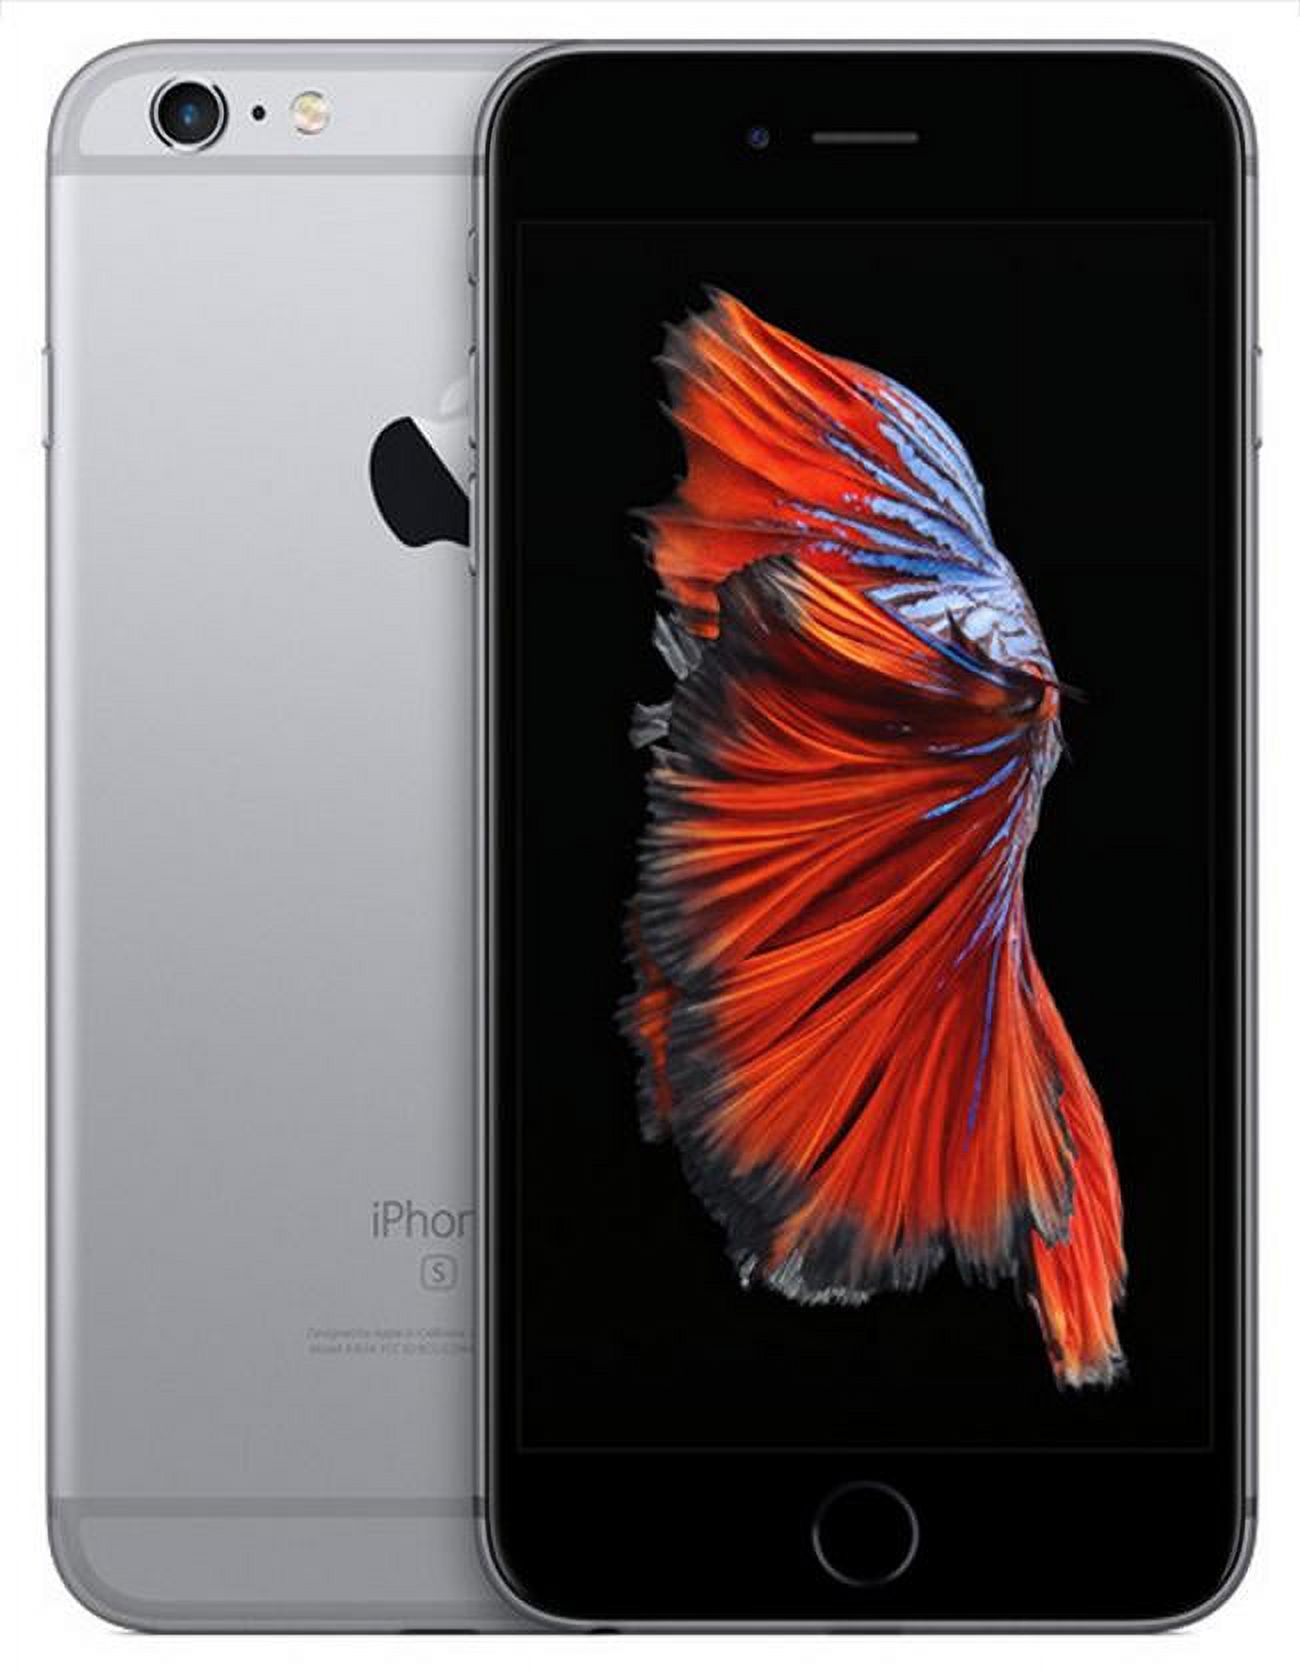 Restored Apple iPhone 6s 16GB, Space Gray - Unlocked GSM (Refurbished) - image 1 of 2